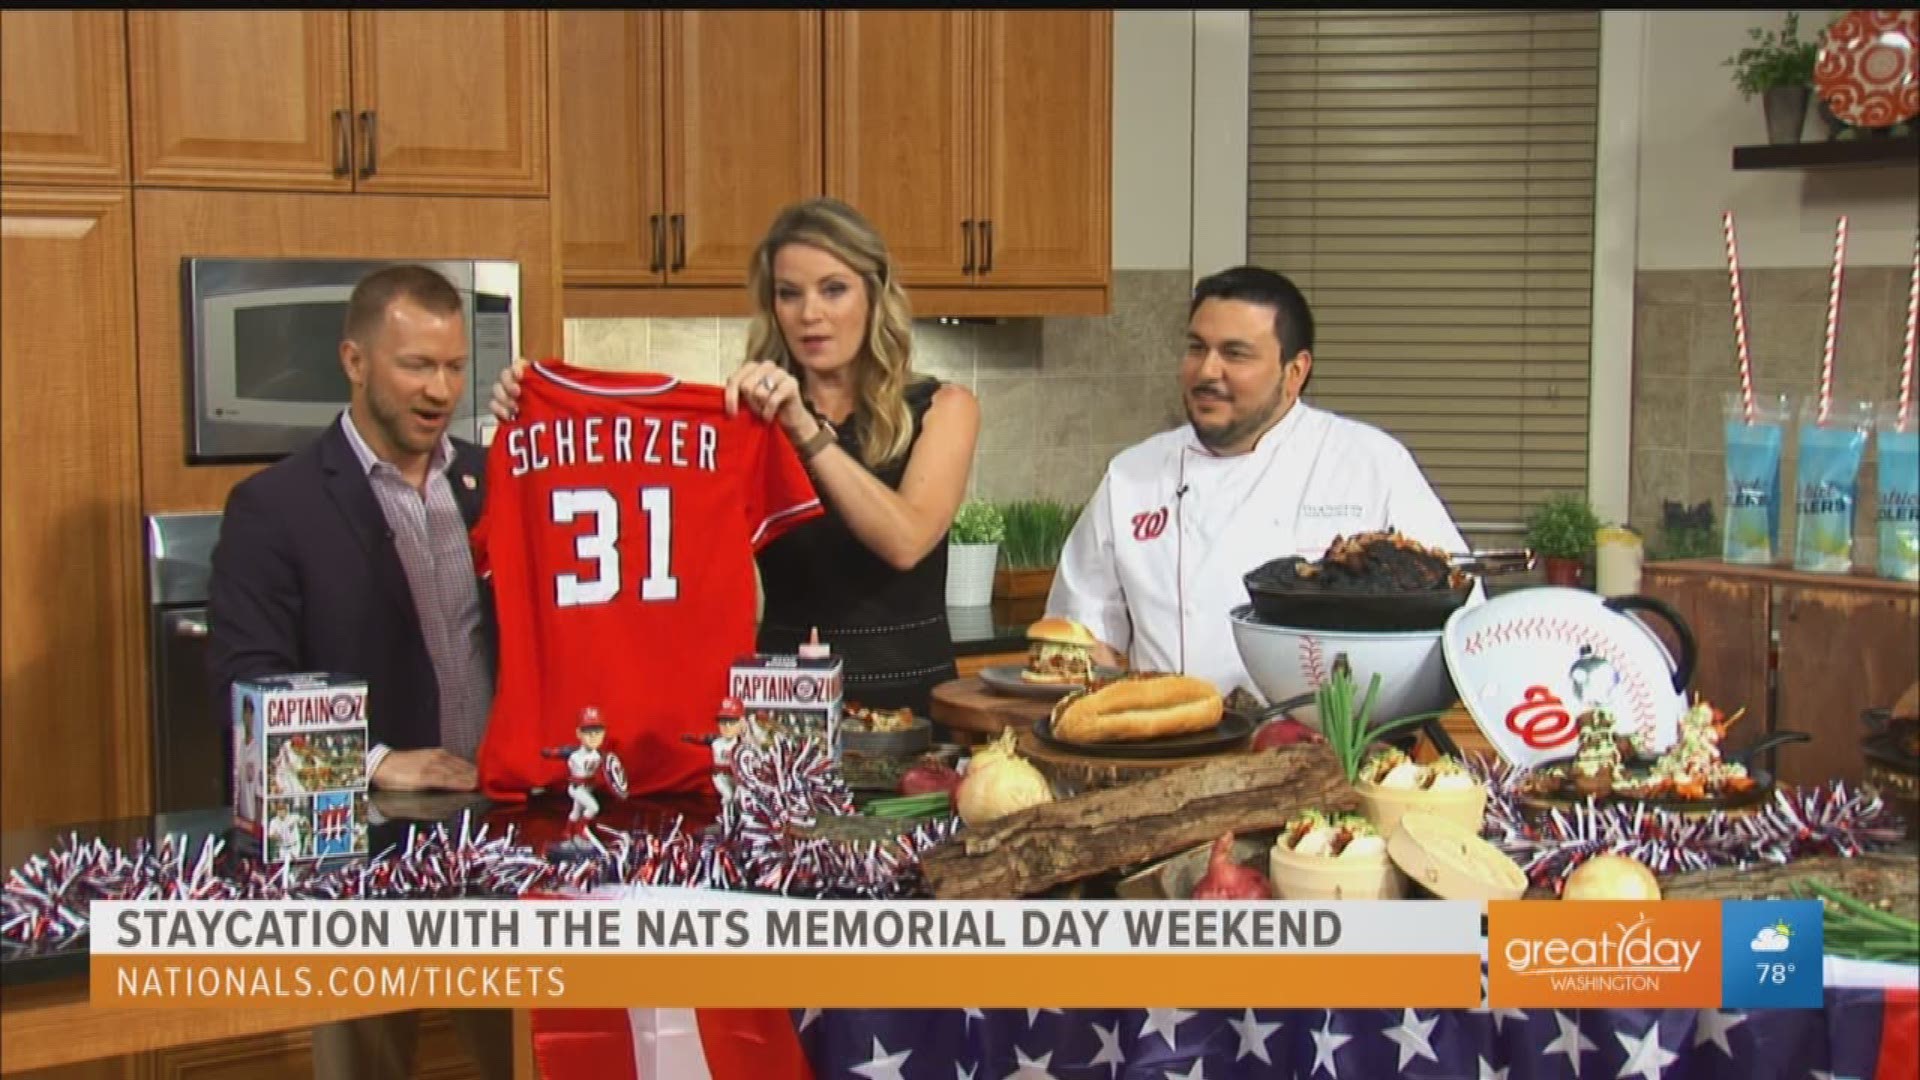 Hear about the excitement at Nationals Park this Memorial Day weekend!  The Nats will host the Miami Marlins.  Executive Vice President of Business Operations Jake Burns and Senior Executive Chef Vince Navarrete give a rundown of the weekend events that include fireworks, Marvel Super Hero Day, and kids can run the bases this Sunday.  For tickets visit Nationals.com/Tickets.